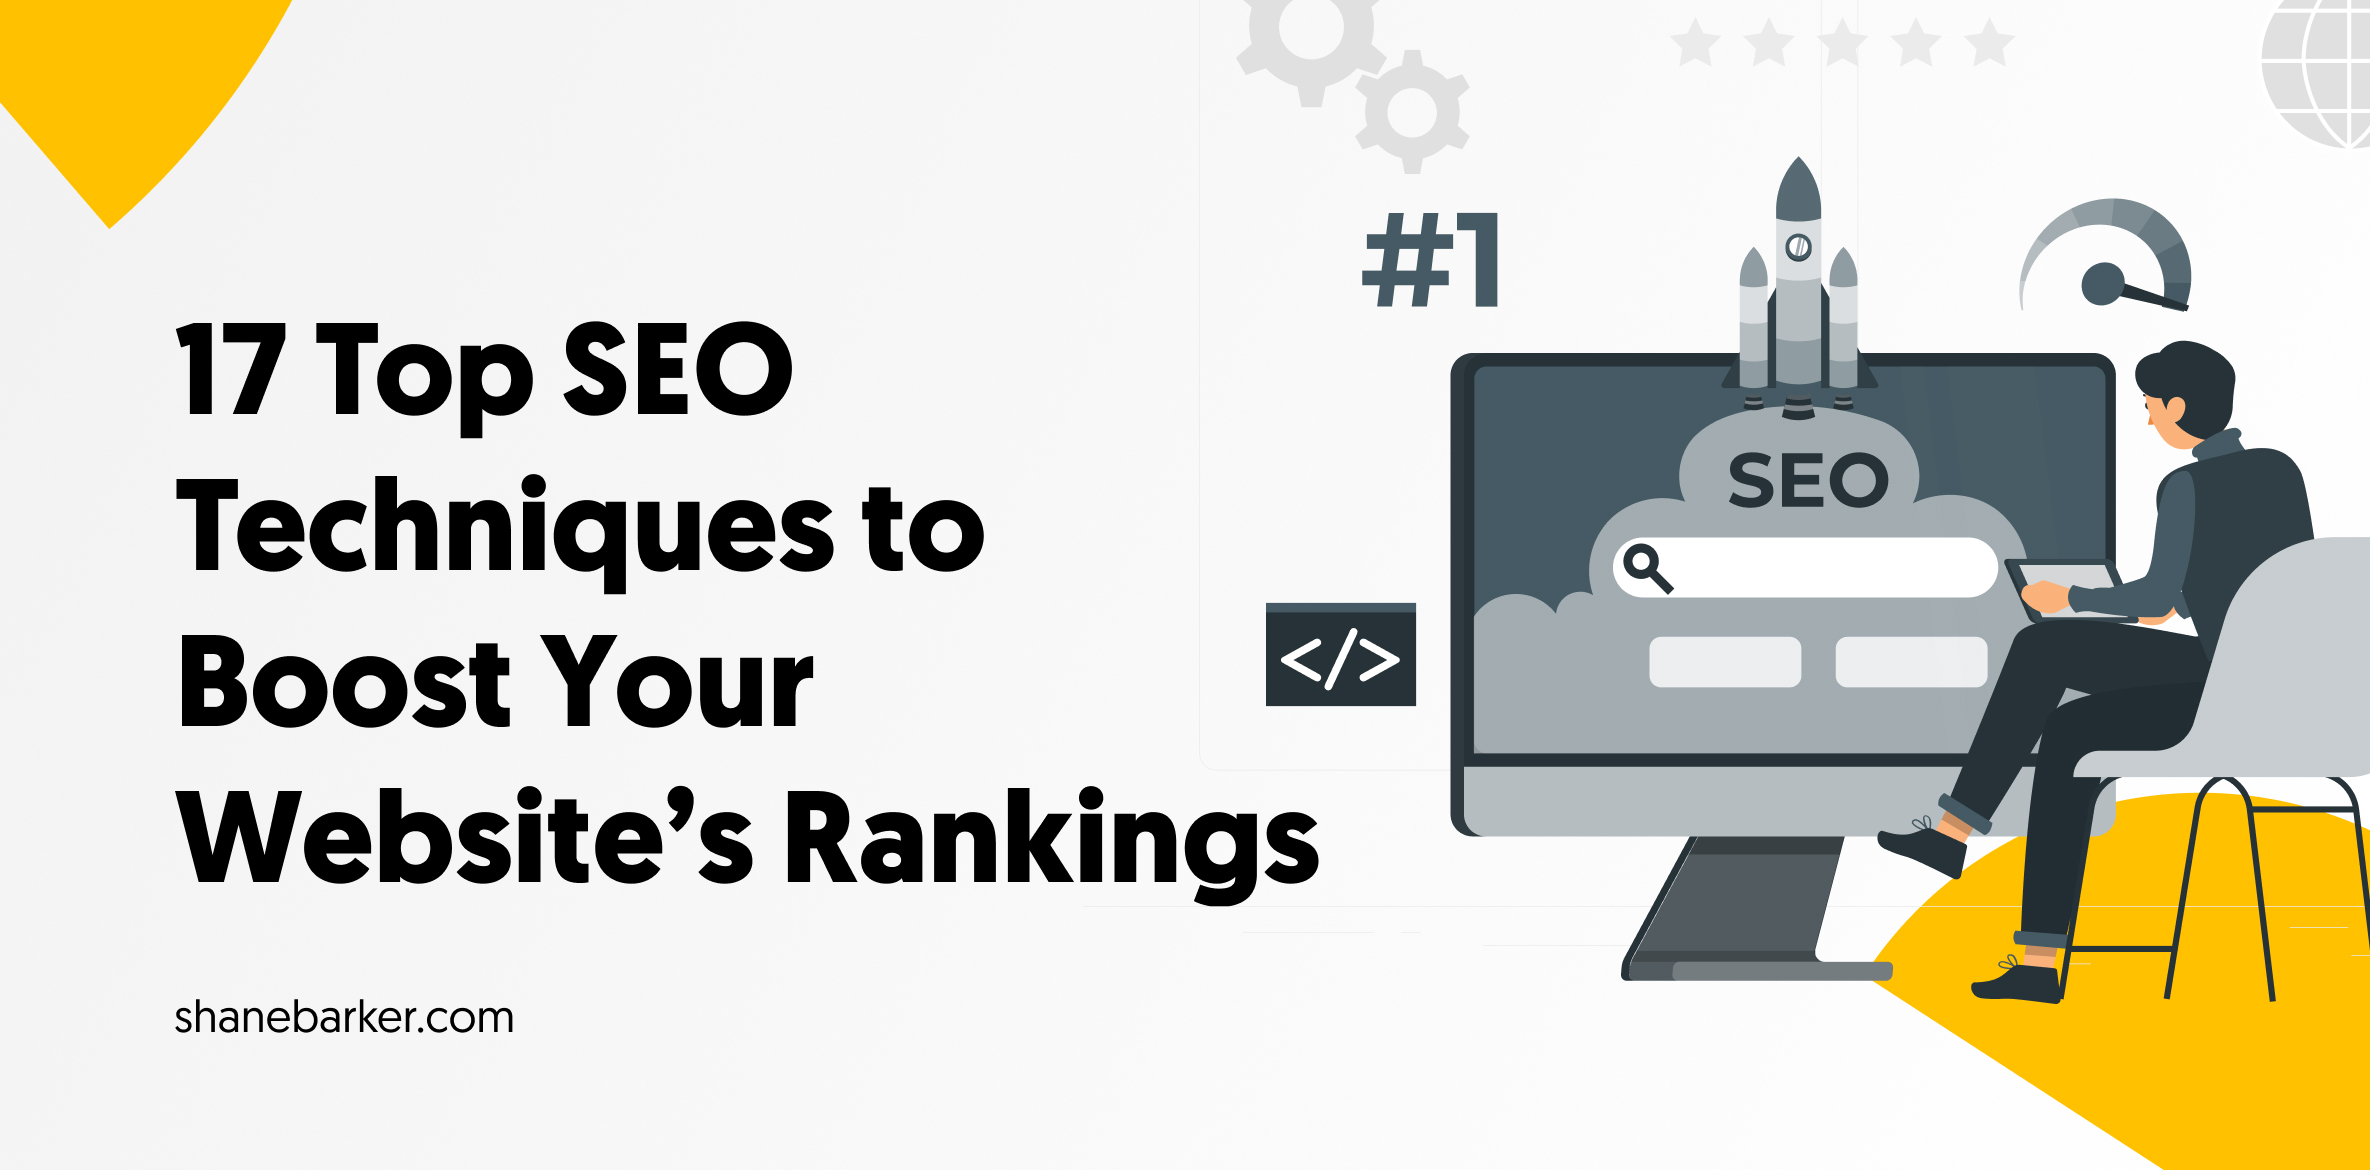 Top SEO Techniques to Boost Your Website’s Rankings